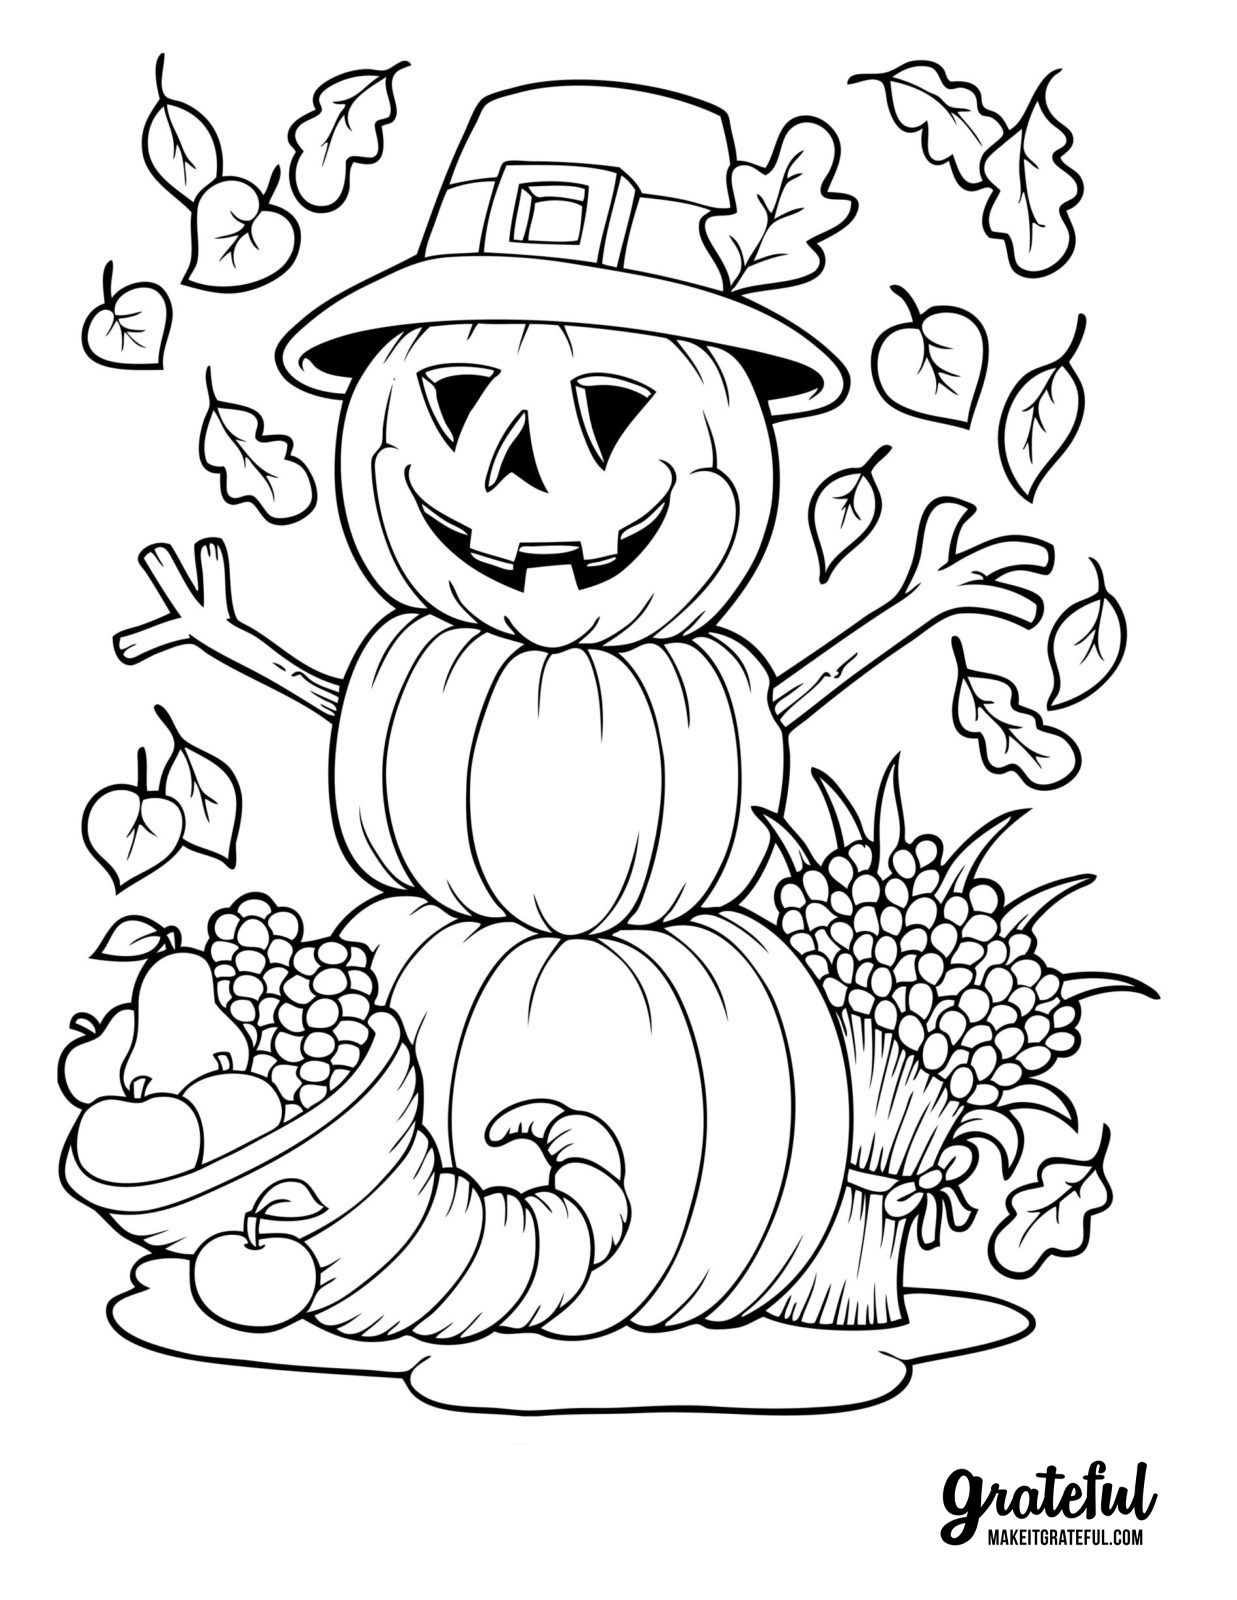 Thanksgiving Coloring Book Pages for Kids